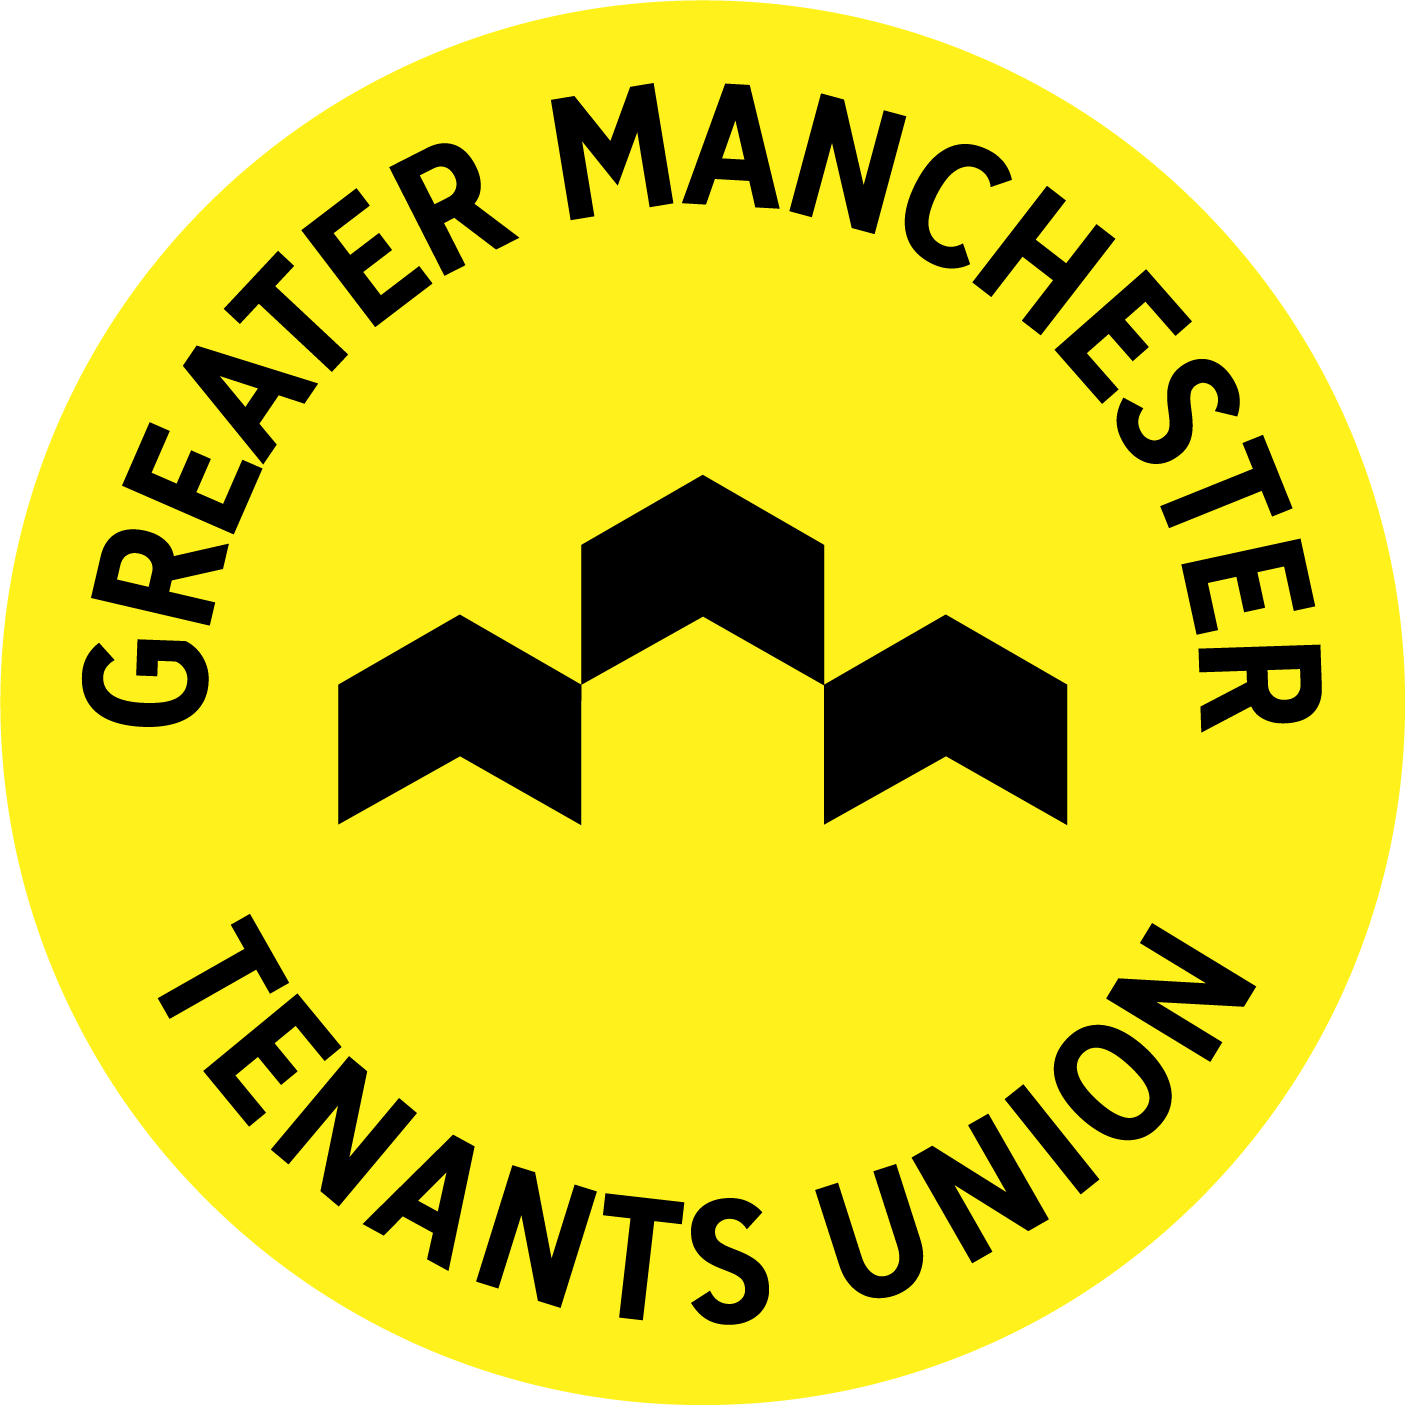 Greater Manchester Tenants Union